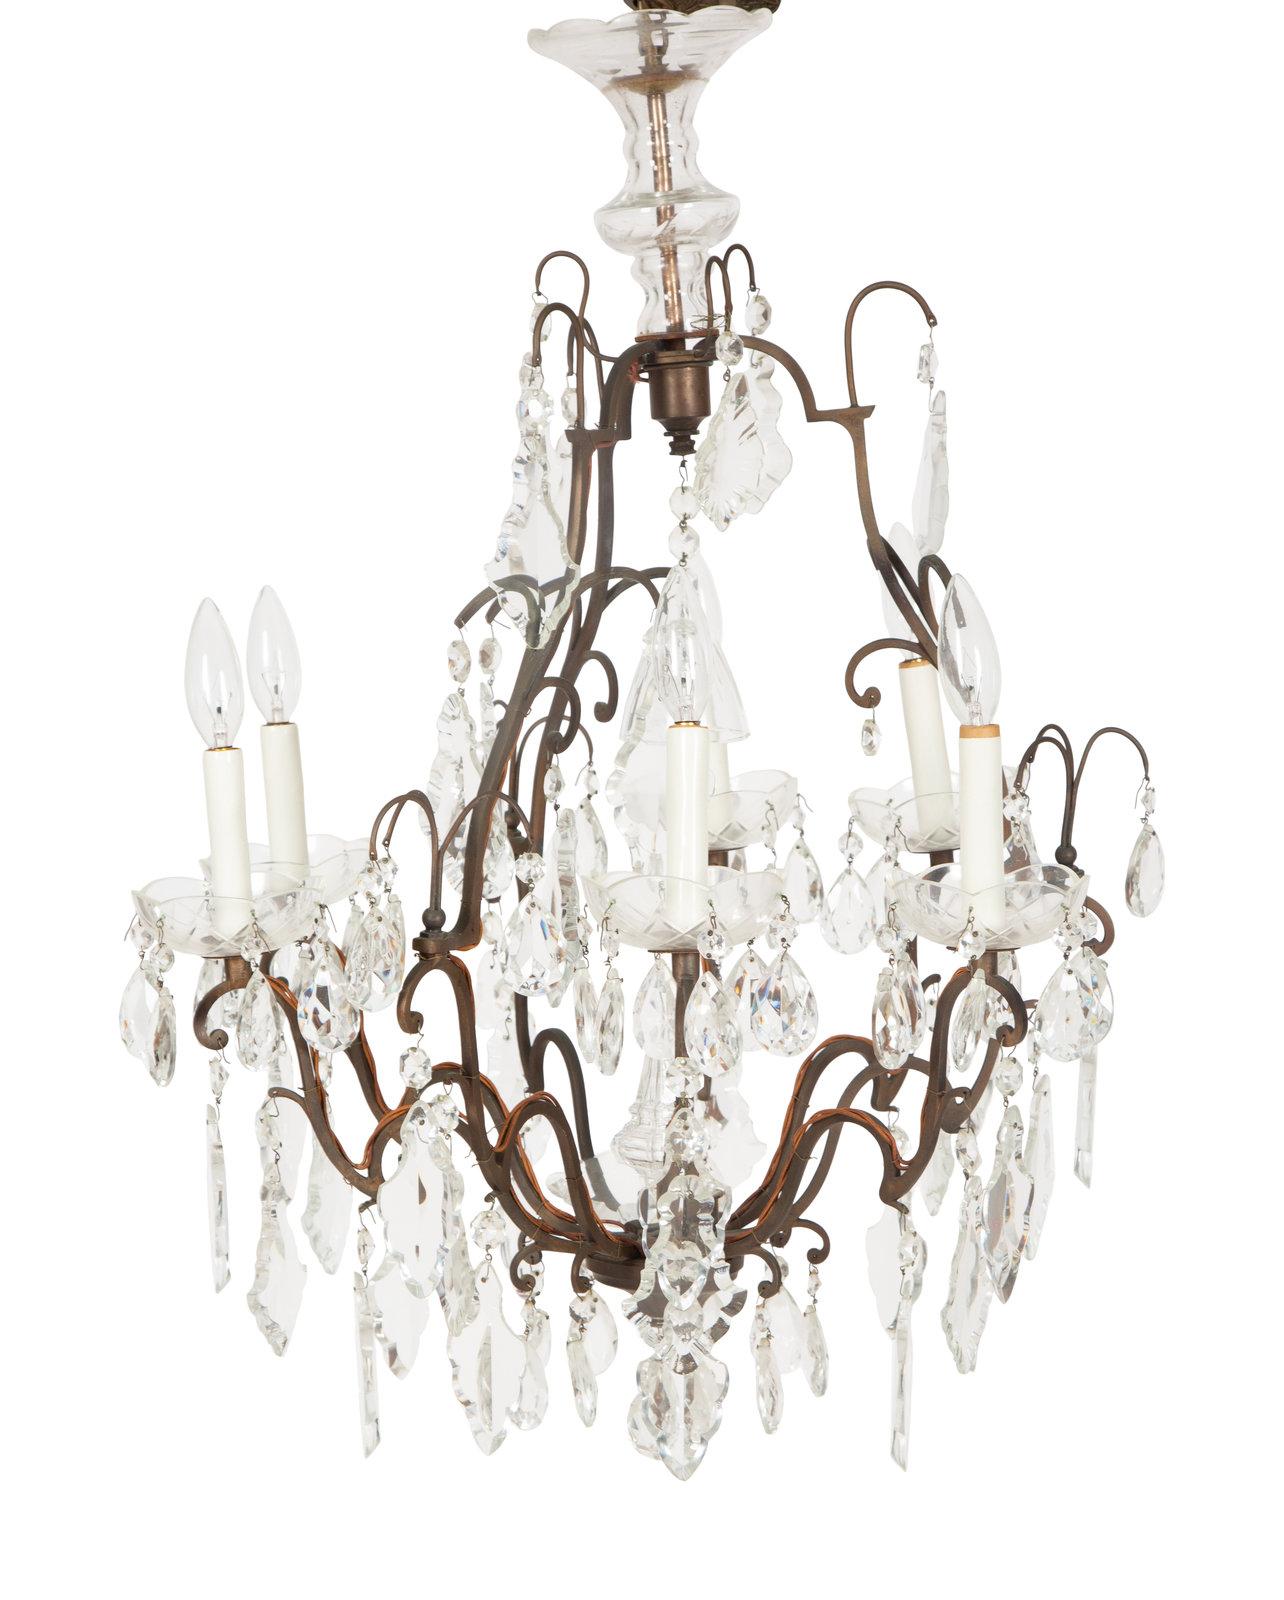 Louis XV Style Cut Glass and Gilt Metal Chandelier
19th/20th Century
Height 20 x diameter 29 inches
